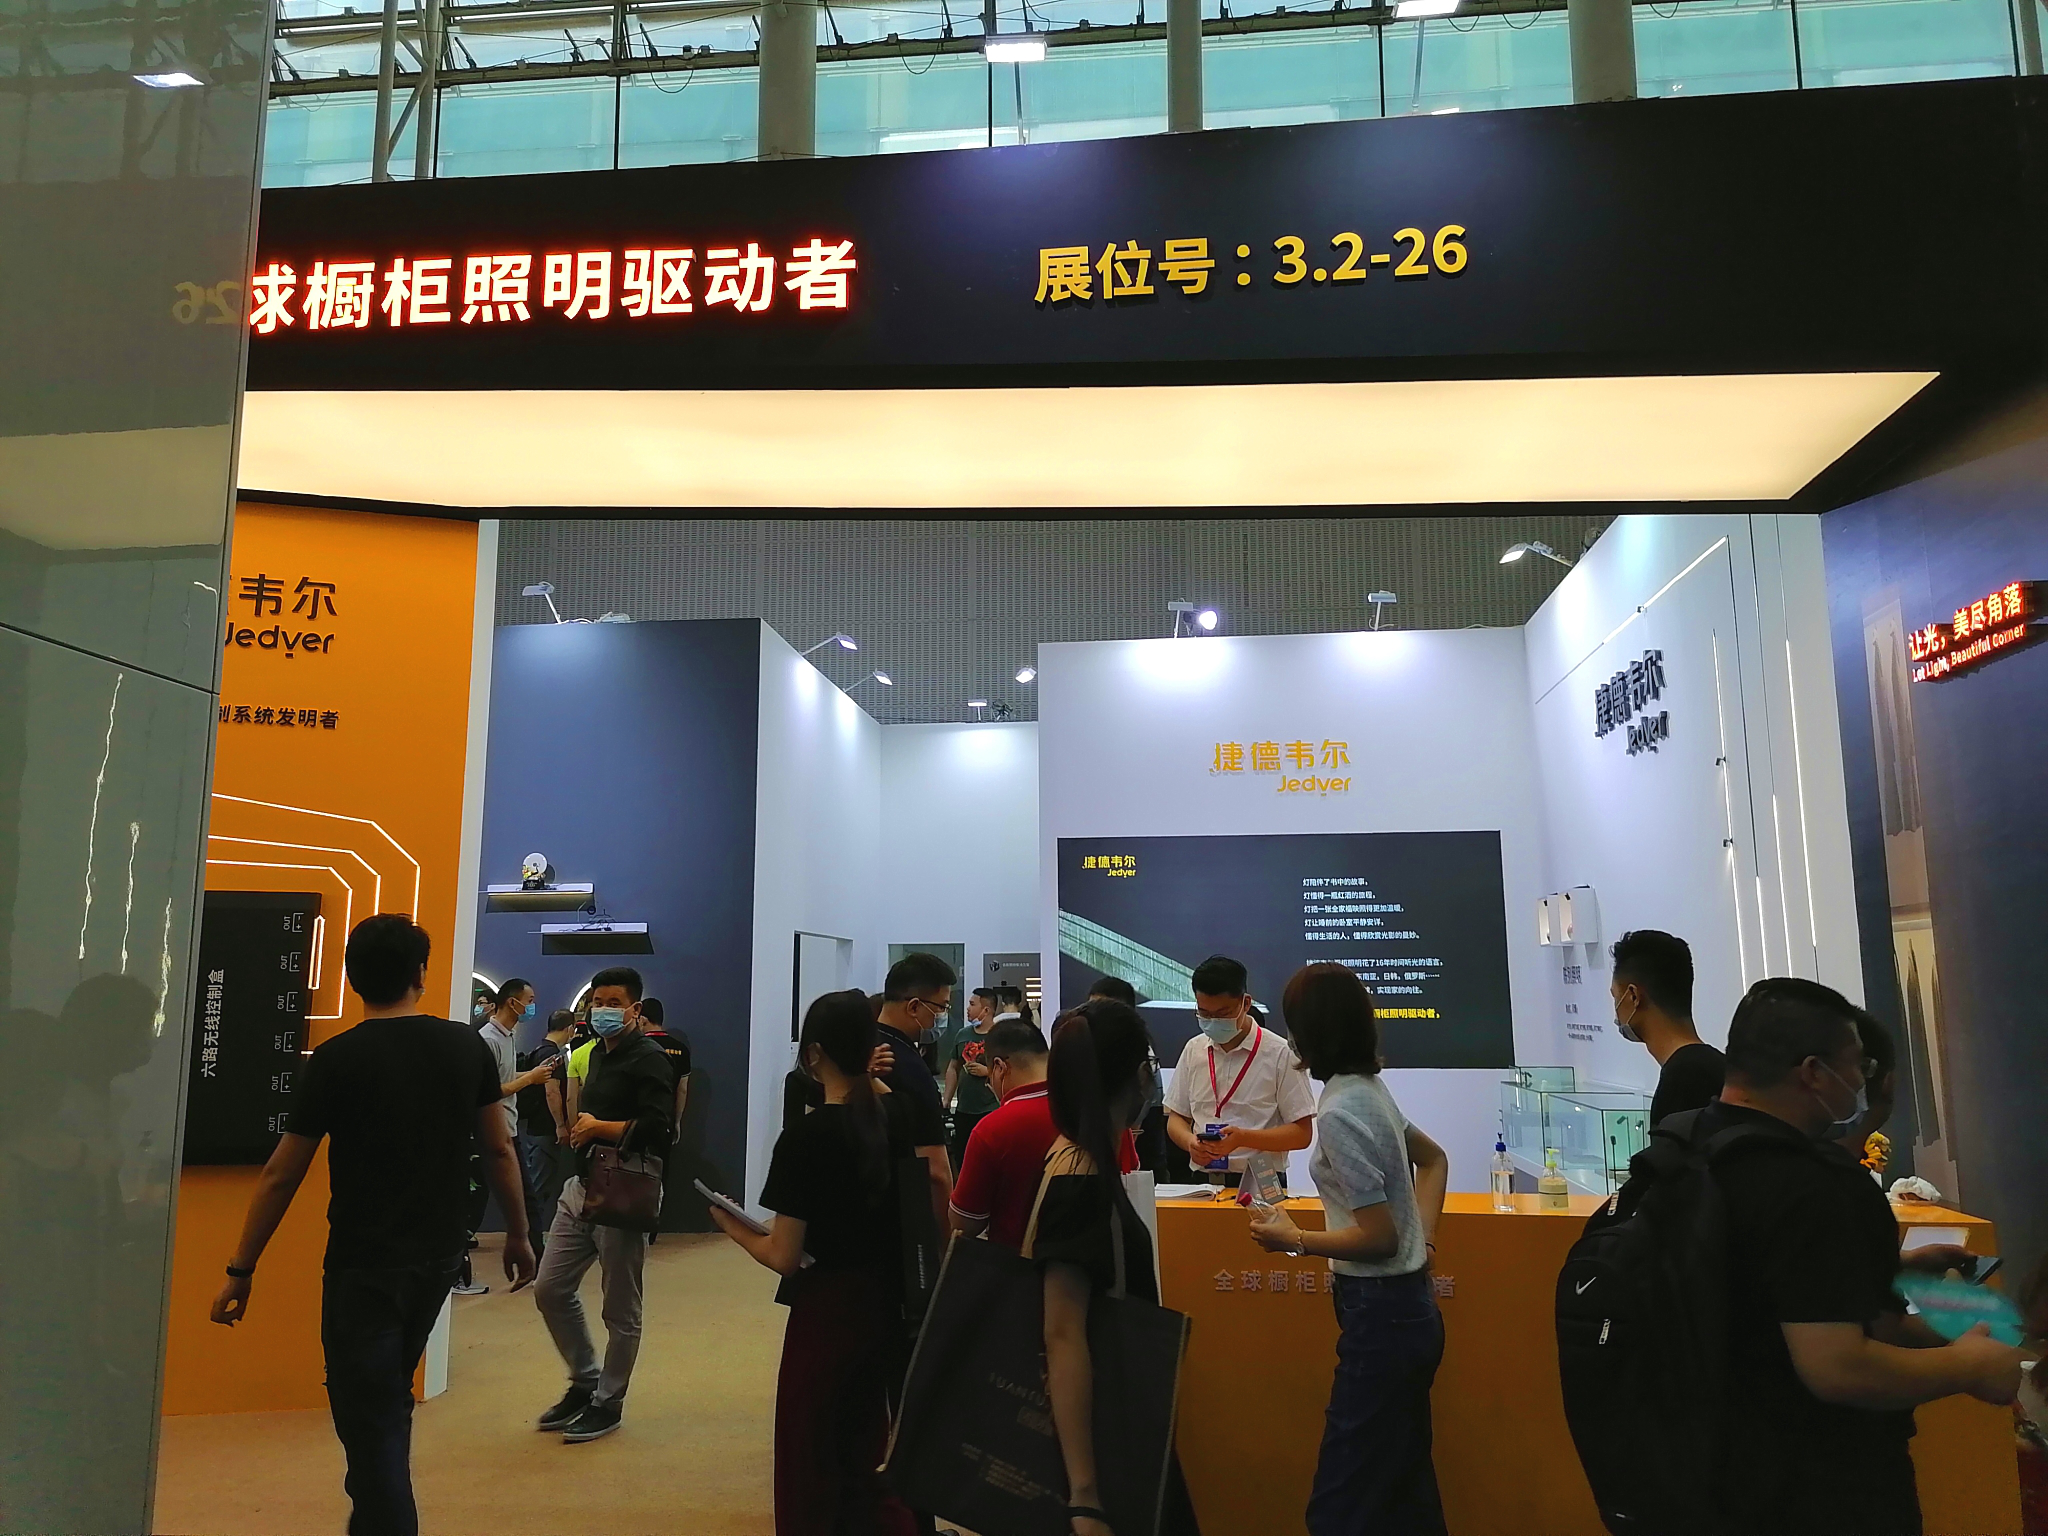 The cabinet lighting wireless intelligent control system was unveiled at the China Construction Expo, and Jedver took the lead (Figure 3)